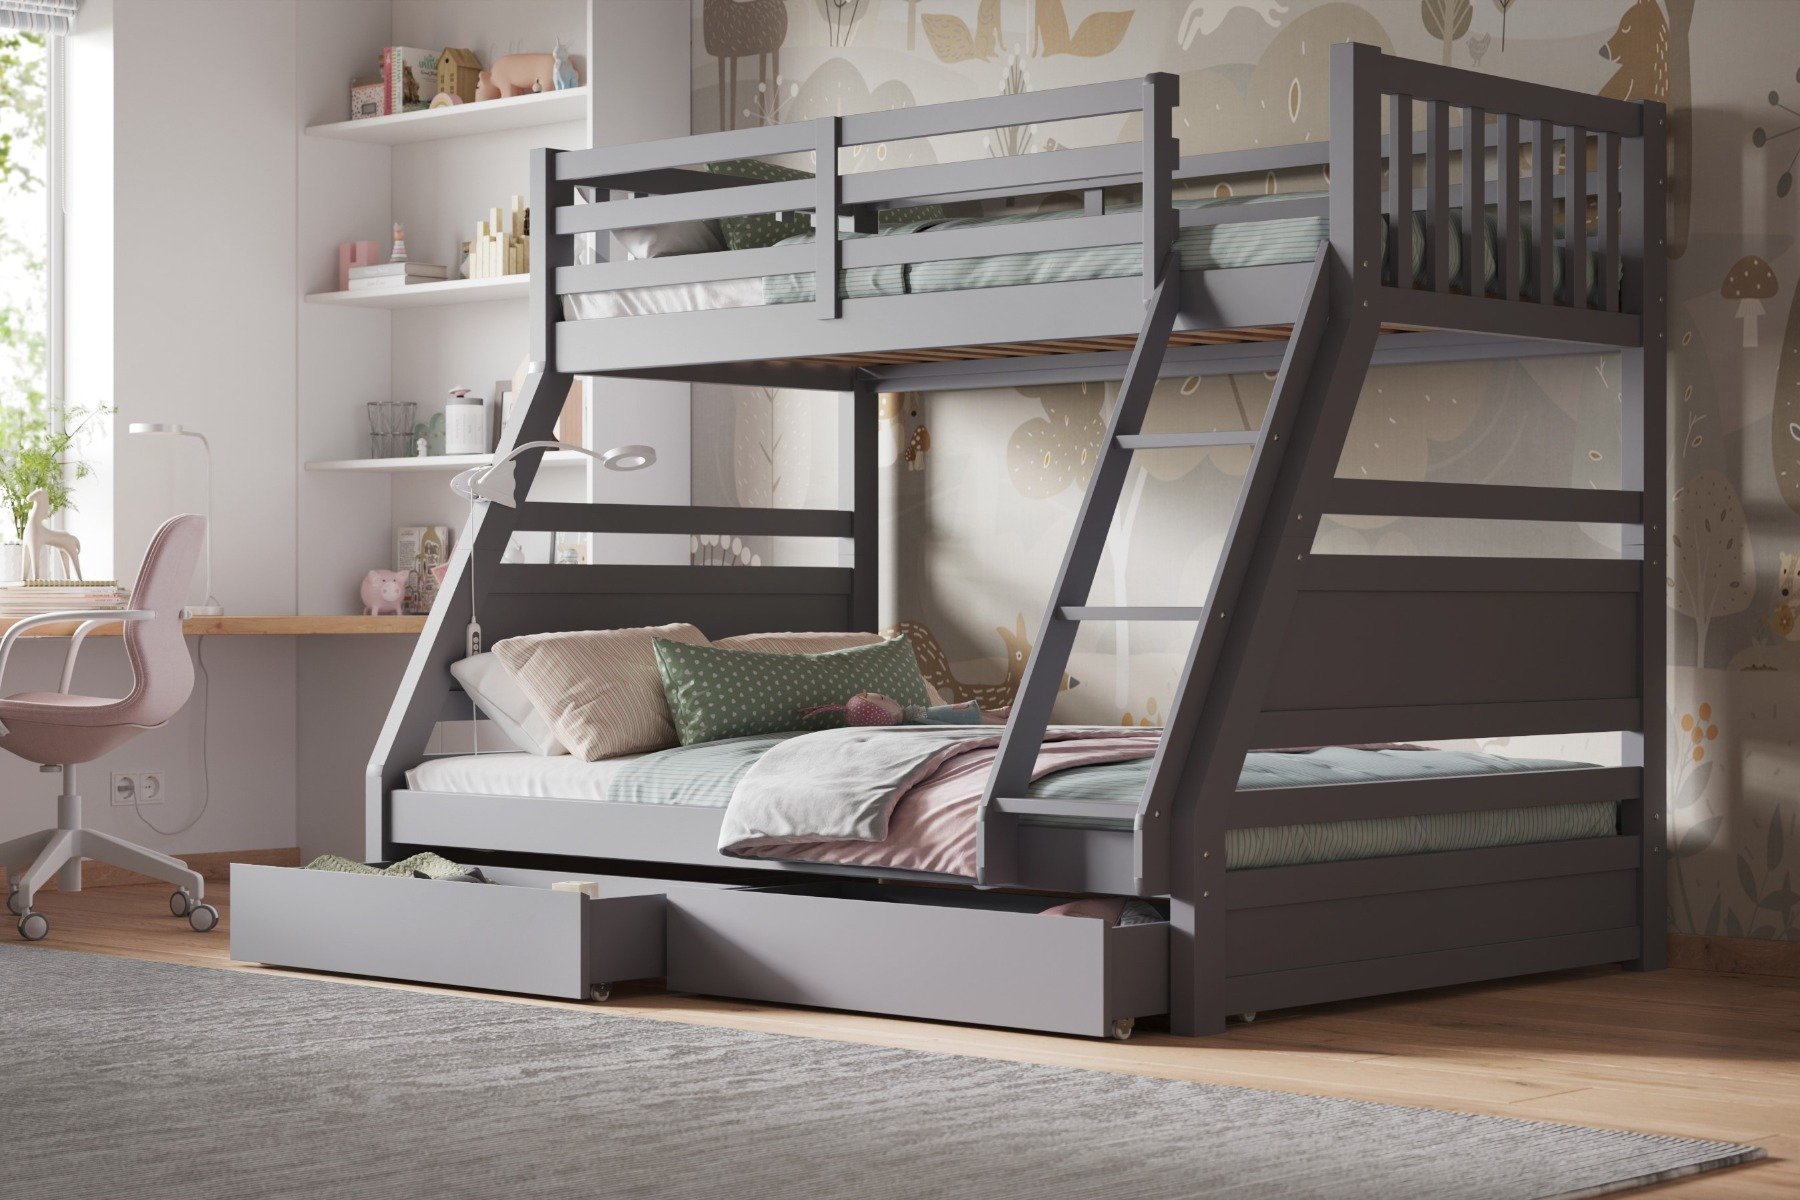 Flair Ollie Wooden Triple Bunk Bed with Drawers Grey